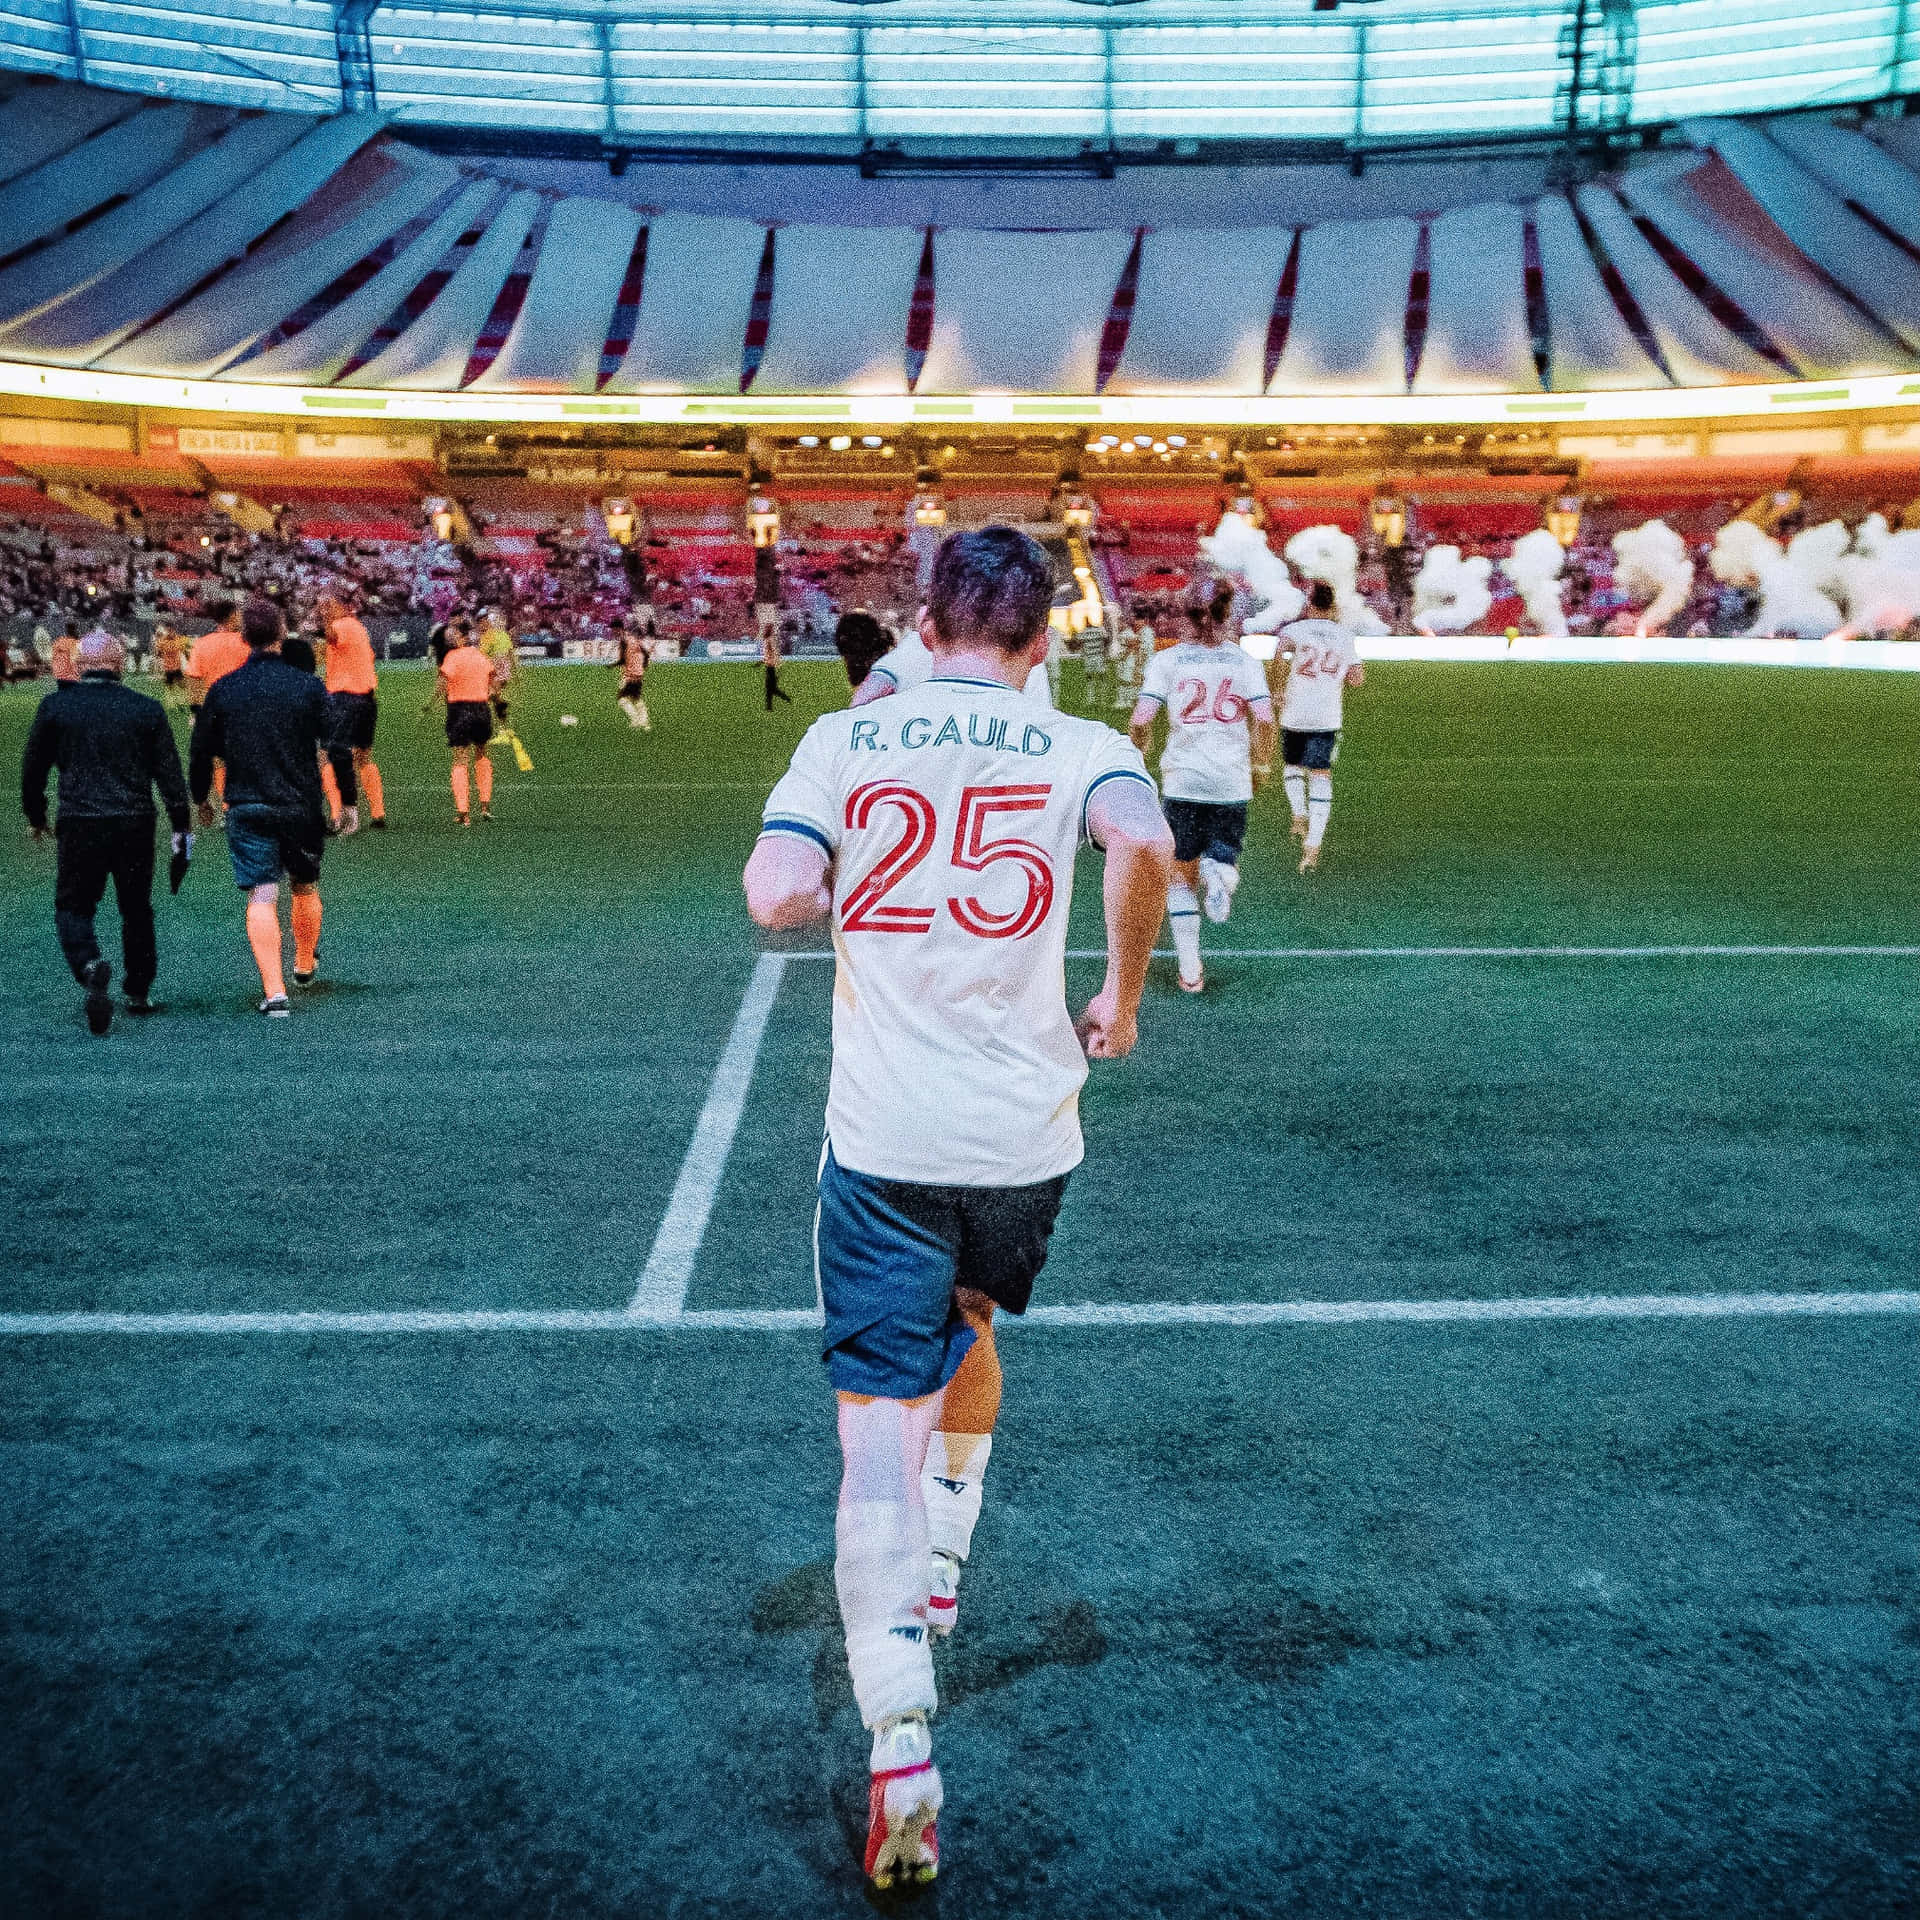 Vancouver Whitecaps Fc Midfielder Ryan Gauld Back Angle Shot Picture